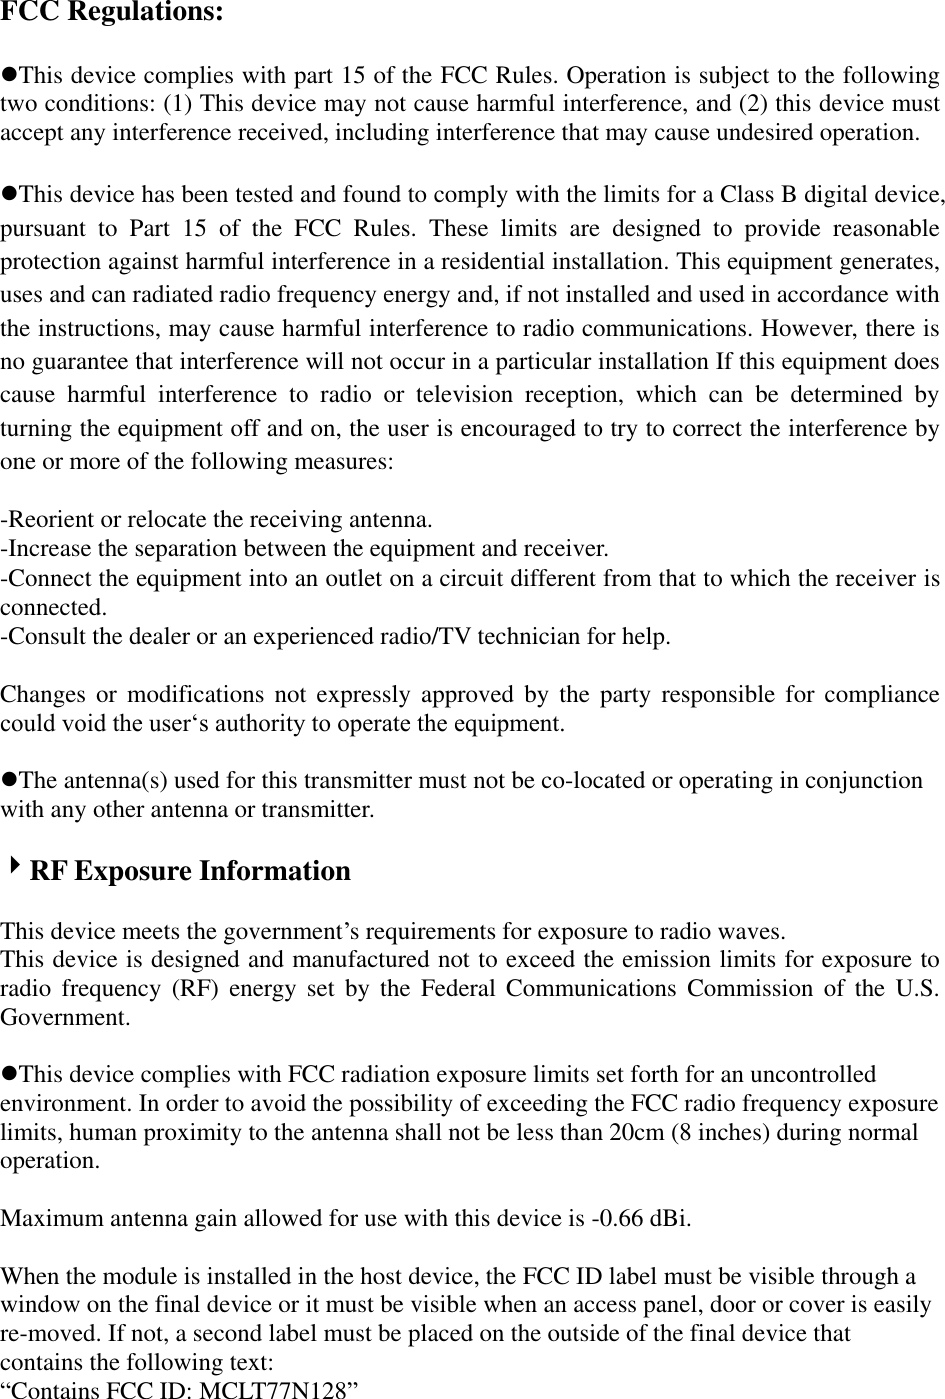 FCC Regulations:  This device complies with part 15 of the FCC Rules. Operation is subject to the following two conditions: (1) This device may not cause harmful interference, and (2) this device must accept any interference received, including interference that may cause undesired operation.  This device has been tested and found to comply with the limits for a Class B digital device, pursuant  to  Part  15  of  the  FCC  Rules.  These  limits  are  designed  to  provide  reasonable protection against harmful interference in a residential installation. This equipment generates, uses and can radiated radio frequency energy and, if not installed and used in accordance with the instructions, may cause harmful interference to radio communications. However, there is no guarantee that interference will not occur in a particular installation If this equipment does cause  harmful  interference  to  radio  or  television  reception,  which  can  be  determined  by turning the equipment off and on, the user is encouraged to try to correct the interference by one or more of the following measures:  -Reorient or relocate the receiving antenna. -Increase the separation between the equipment and receiver. -Connect the equipment into an outlet on a circuit different from that to which the receiver is connected. -Consult the dealer or an experienced radio/TV technician for help.  Changes  or  modifications not expressly approved by the party responsible for compliance could void the user„s authority to operate the equipment.  The antenna(s) used for this transmitter must not be co-located or operating in conjunction with any other antenna or transmitter.  RF Exposure Information  This device meets the government‟s requirements for exposure to radio waves. This device is designed and manufactured not to exceed the emission limits for exposure to radio  frequency  (RF)  energy  set  by  the  Federal  Communications  Commission  of  the  U.S. Government.  This device complies with FCC radiation exposure limits set forth for an uncontrolled environment. In order to avoid the possibility of exceeding the FCC radio frequency exposure limits, human proximity to the antenna shall not be less than 20cm (8 inches) during normal operation.  Maximum antenna gain allowed for use with this device is -0.66 dBi.  When the module is installed in the host device, the FCC ID label must be visible through a window on the final device or it must be visible when an access panel, door or cover is easily re-moved. If not, a second label must be placed on the outside of the final device that contains the following text:   “Contains FCC ID: MCLT77N128”  